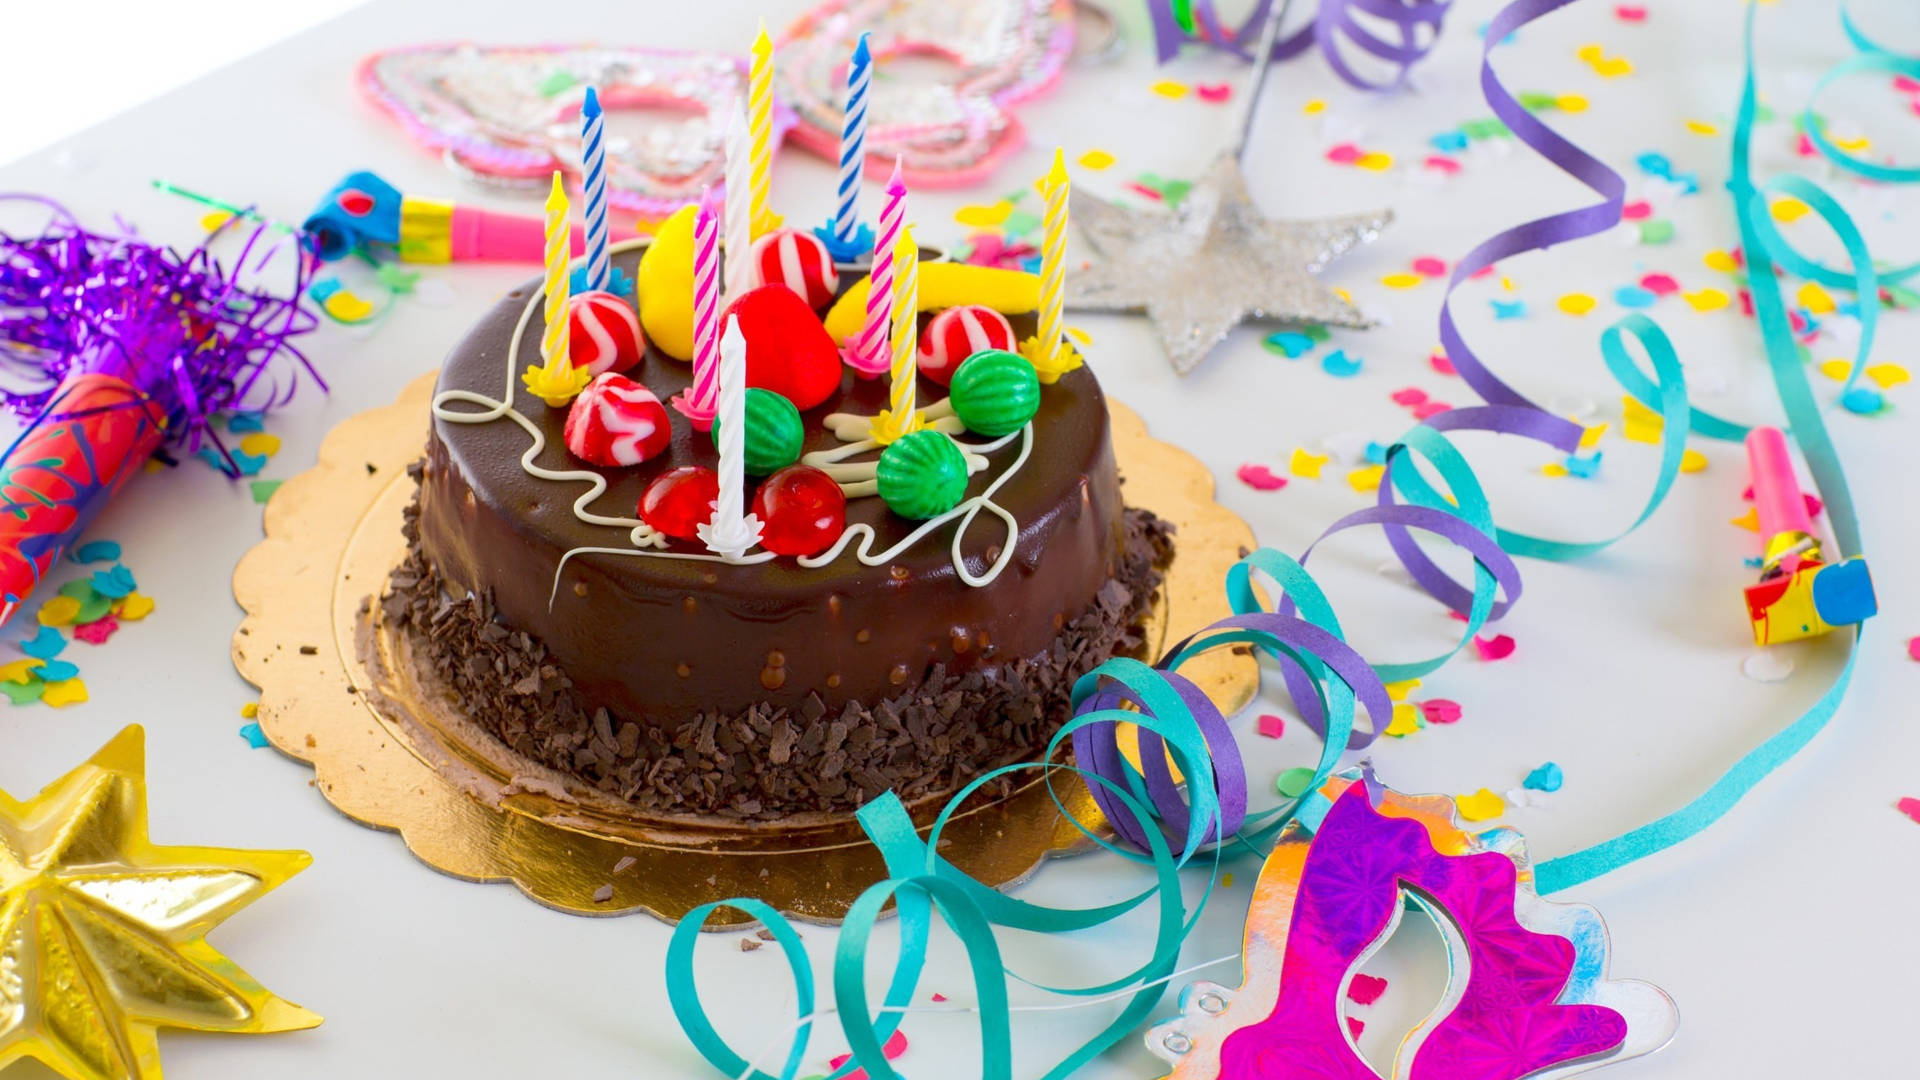 A Vibrant And Colorful Birthday Cake With Lit Candles Background